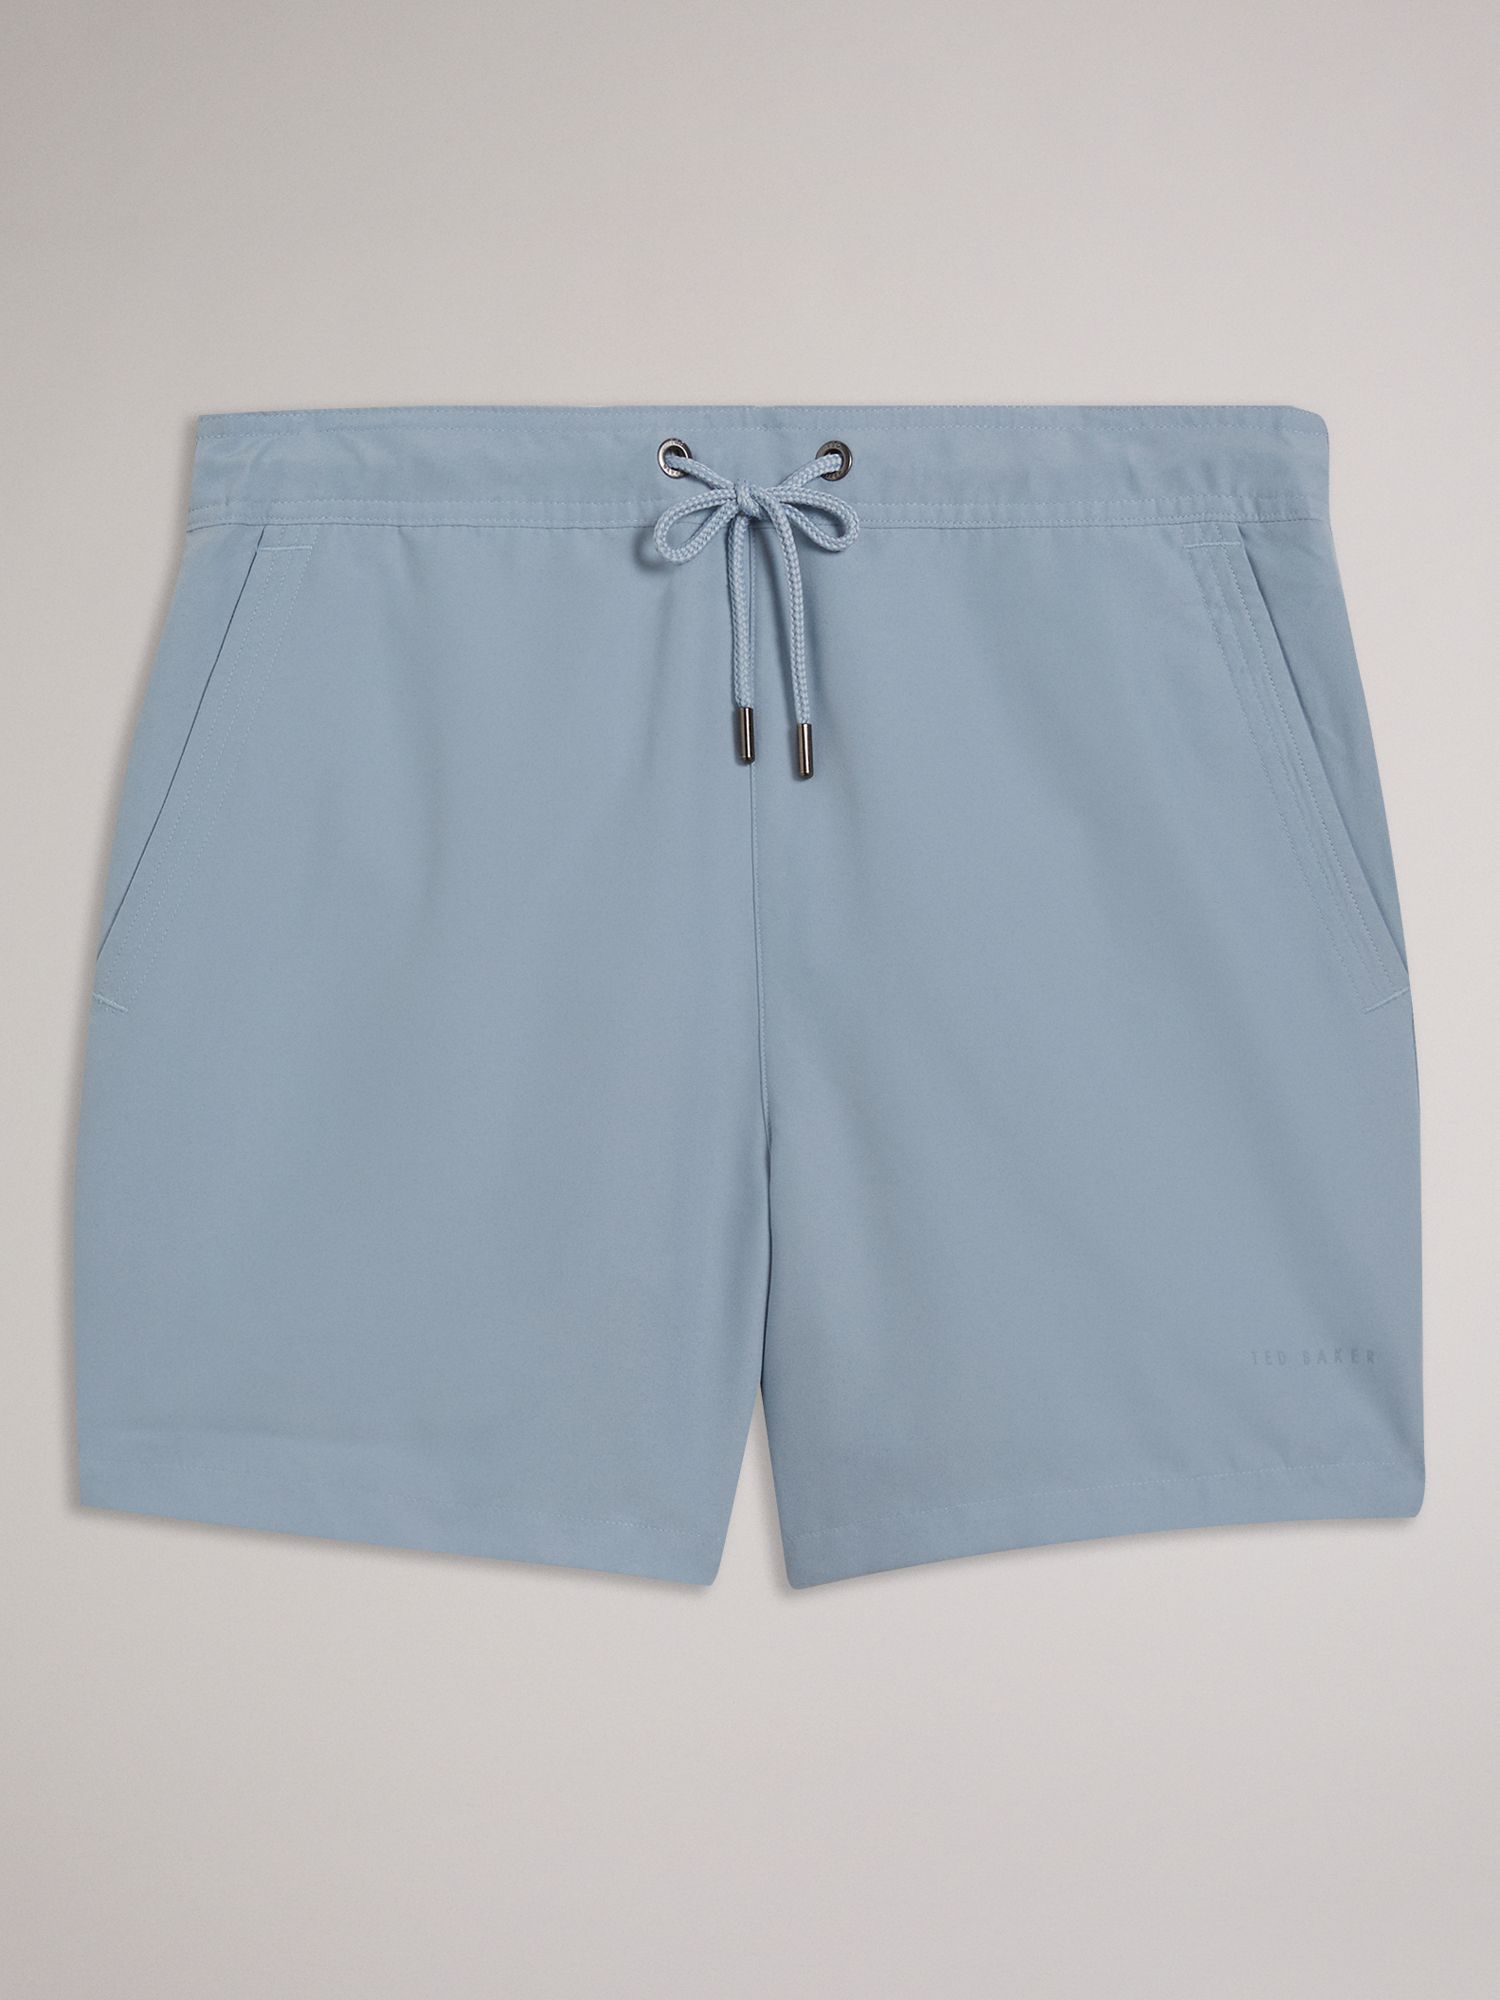 Ted Baker Hiltree Swimming Trunks, Mid Blue, XL